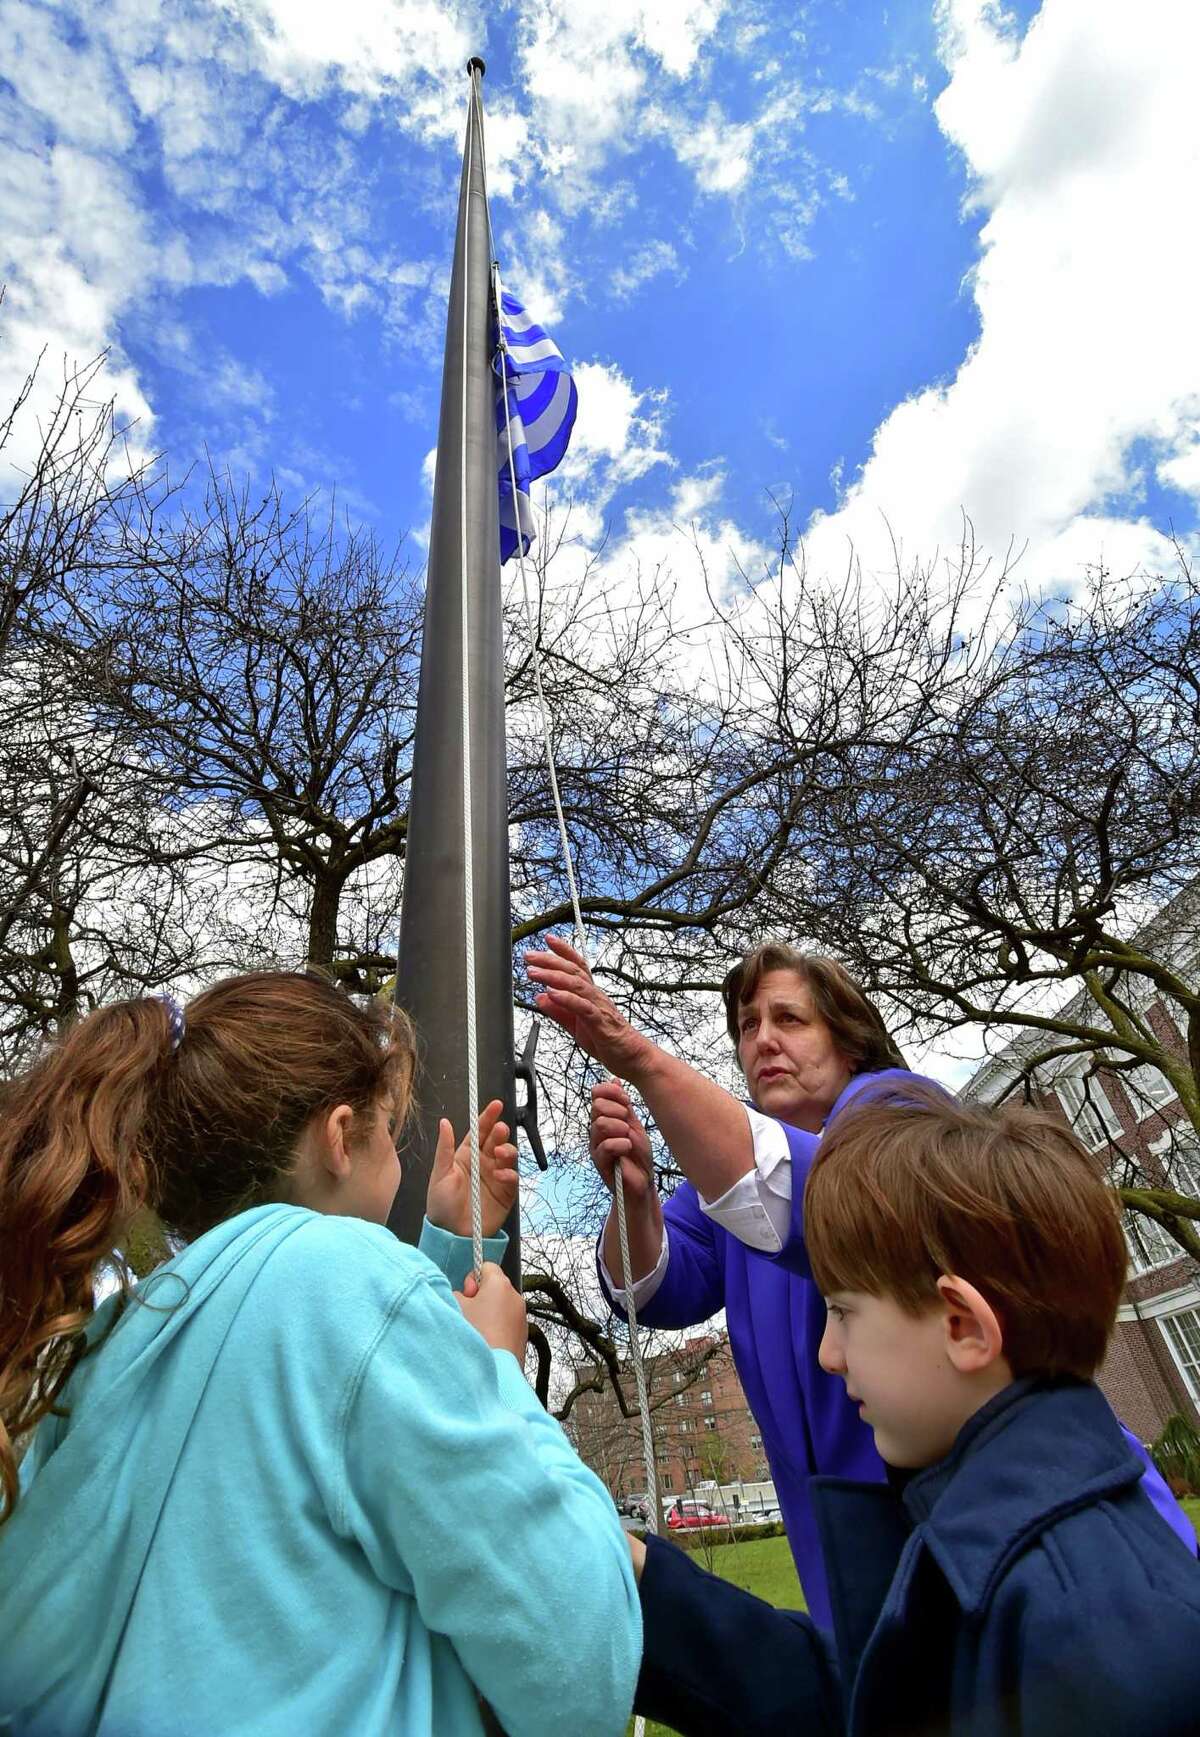 Karen Fassuliotis raises the flag of Greece with some help from Eliana Kassaris, 9, left, and Chris Harmantzis, 5, during a flag raising ceremony to mark Greek Independence Day at Town Hall in Greenwich, Conn., on Friday March 25, 2022.